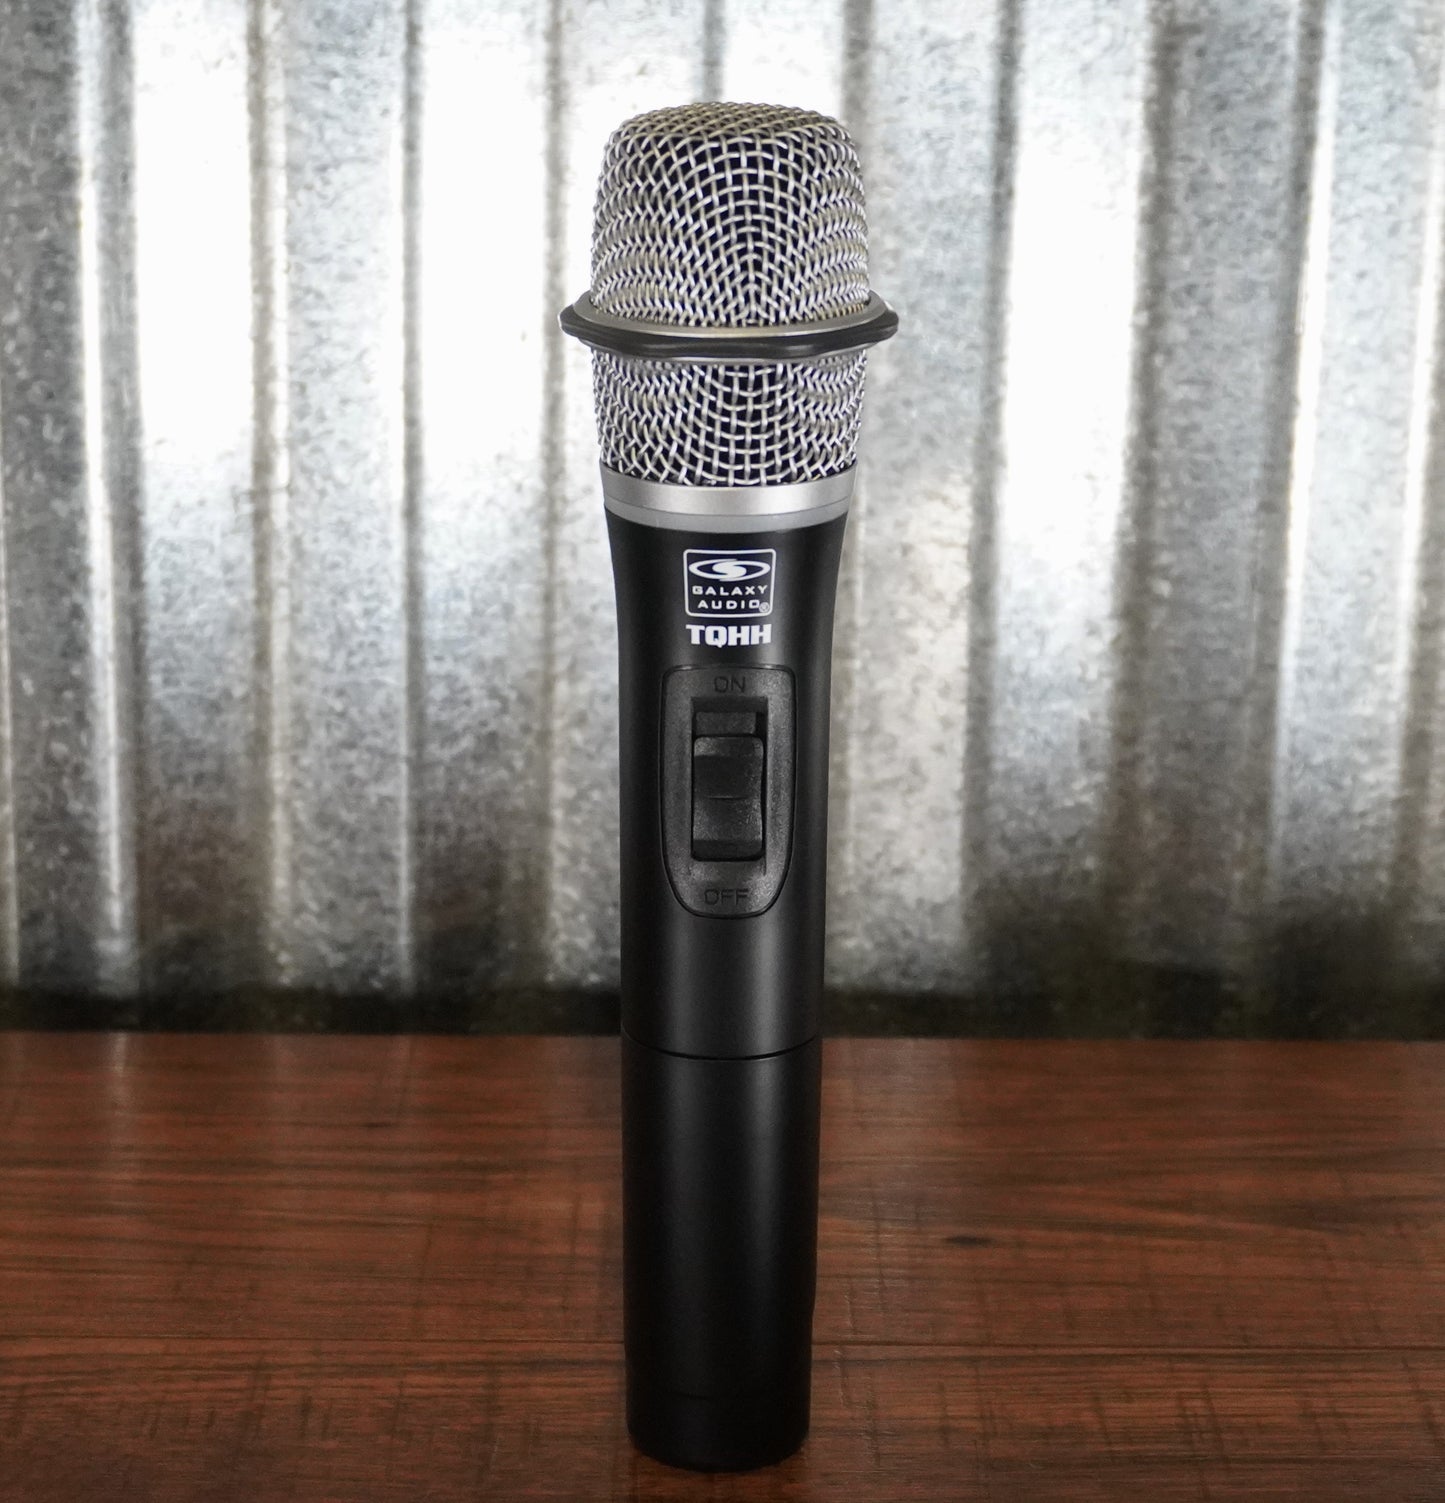 Galaxy Audio Quest TQ8-20H0N Portable Battery Powered PA System & Wireless Handheld Microphone